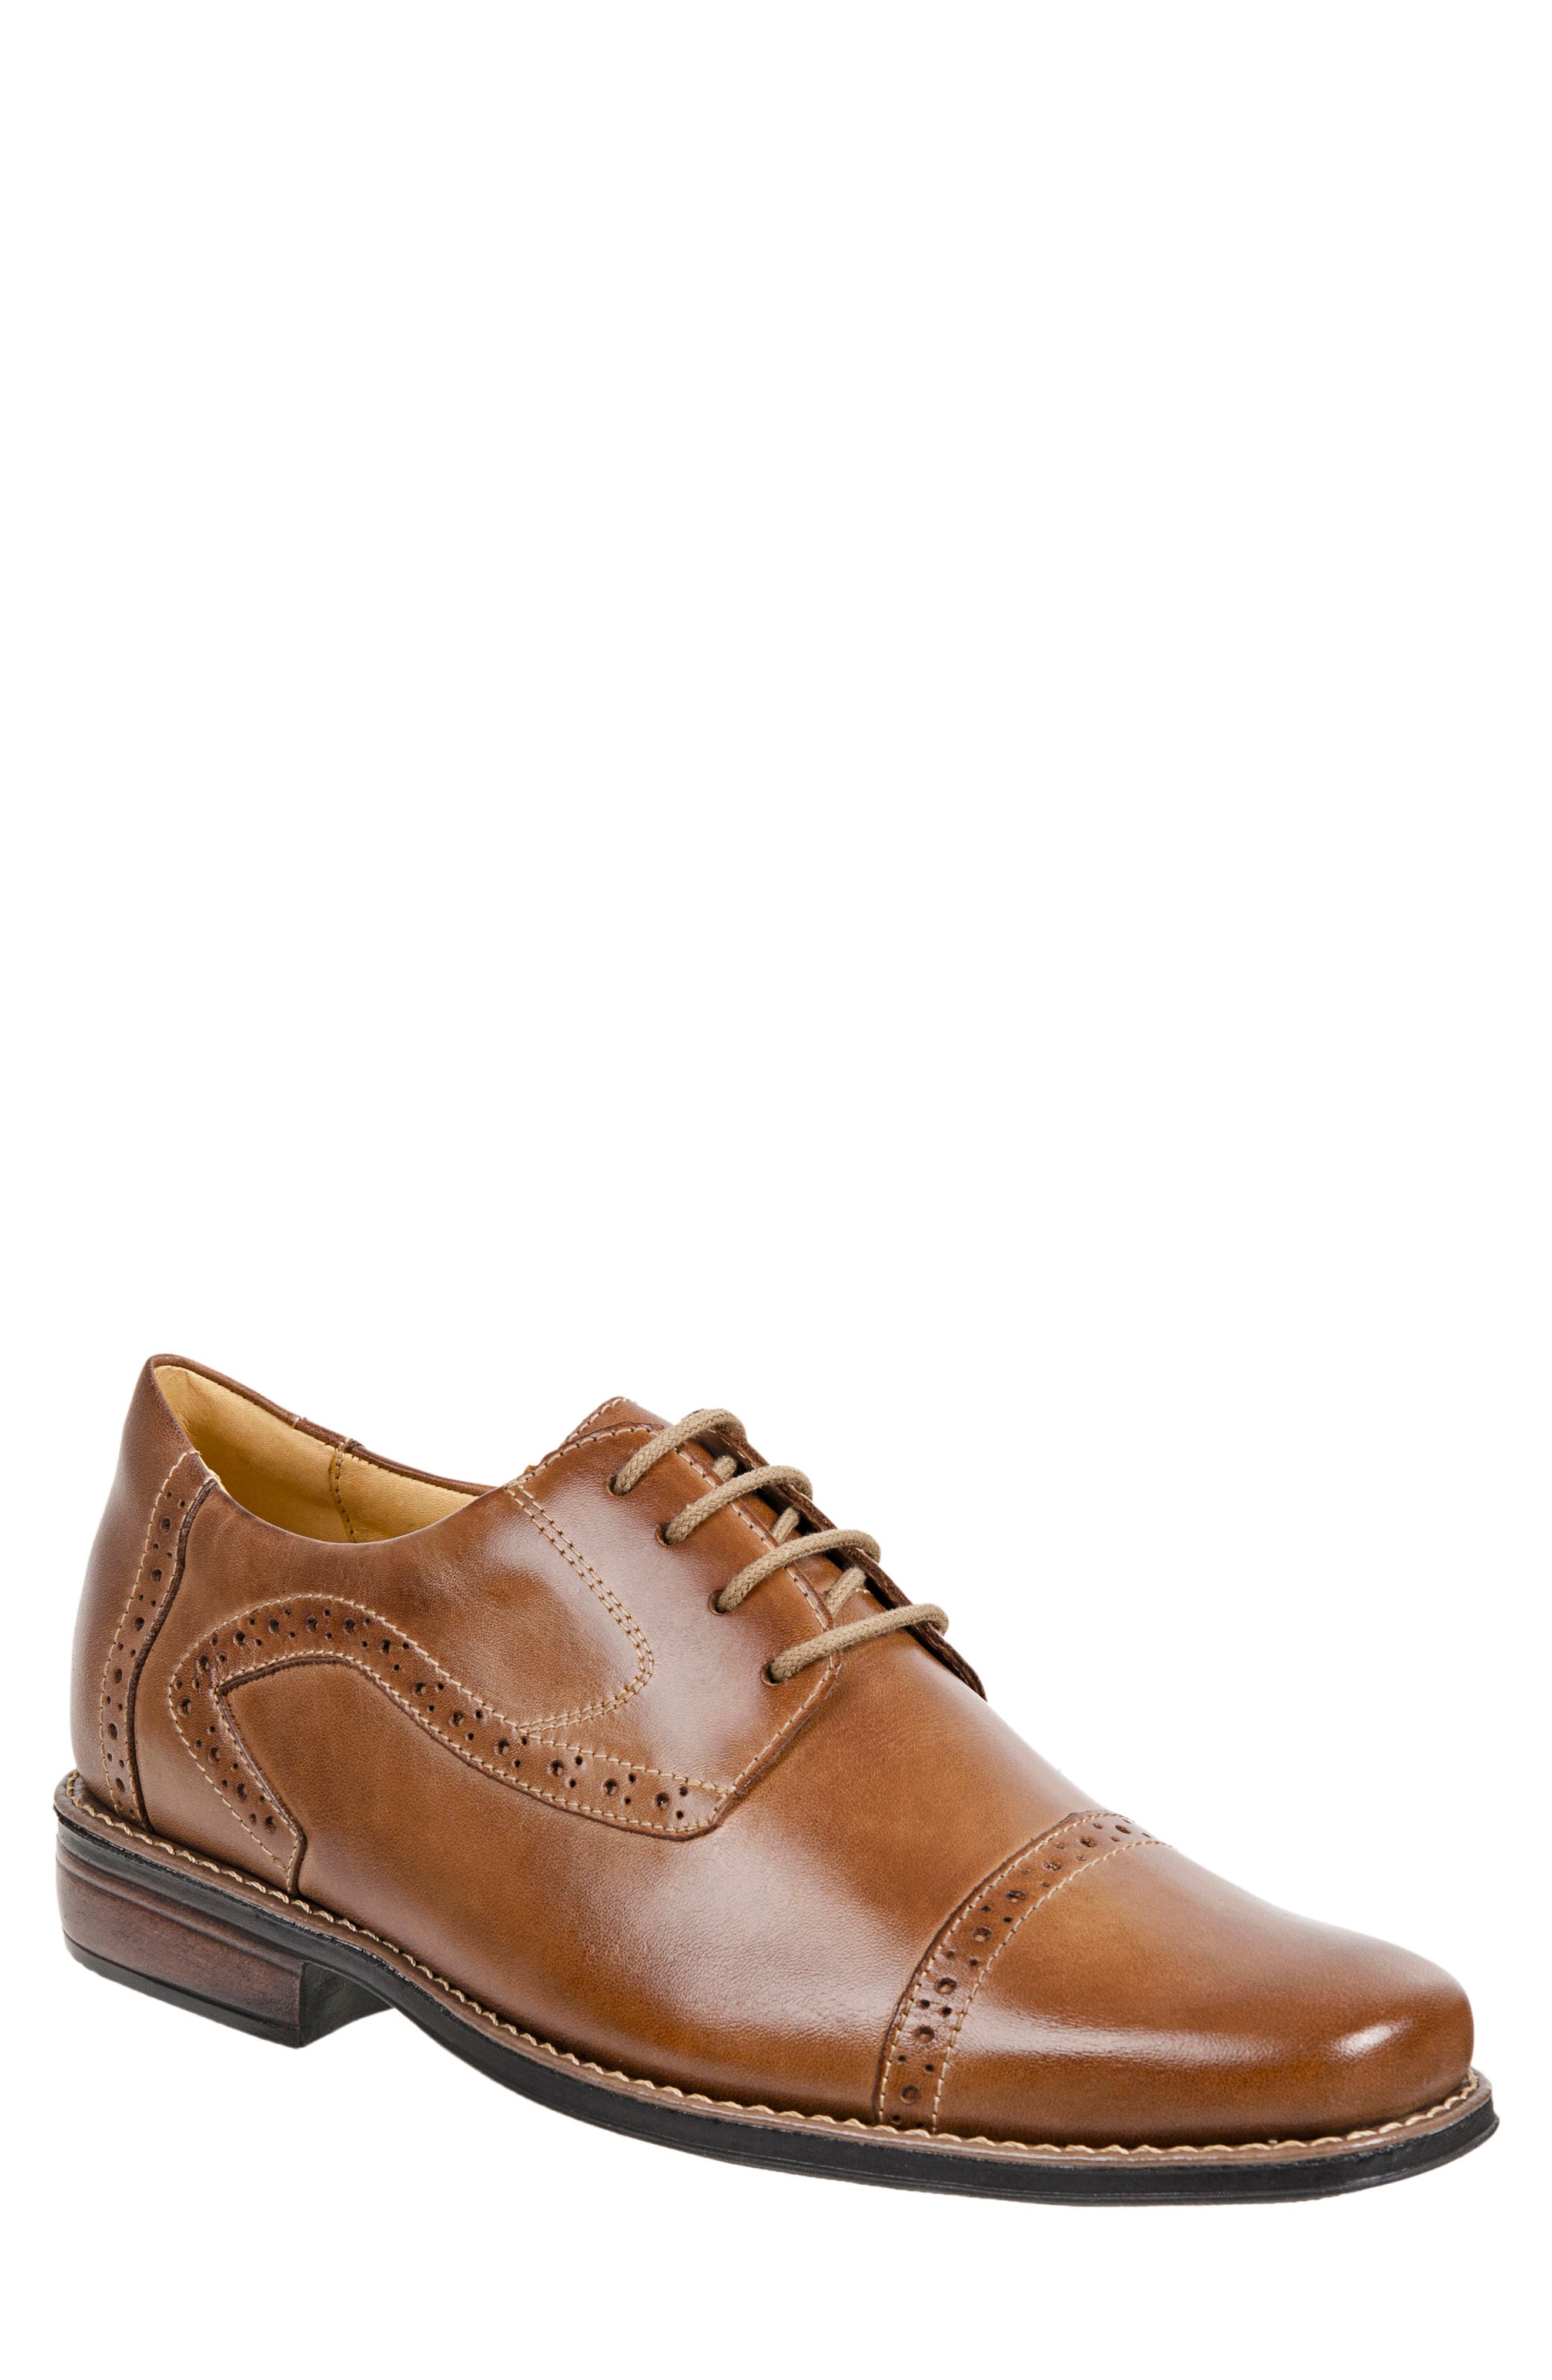 Men's Sandro Moscoloni Shoes | Nordstrom